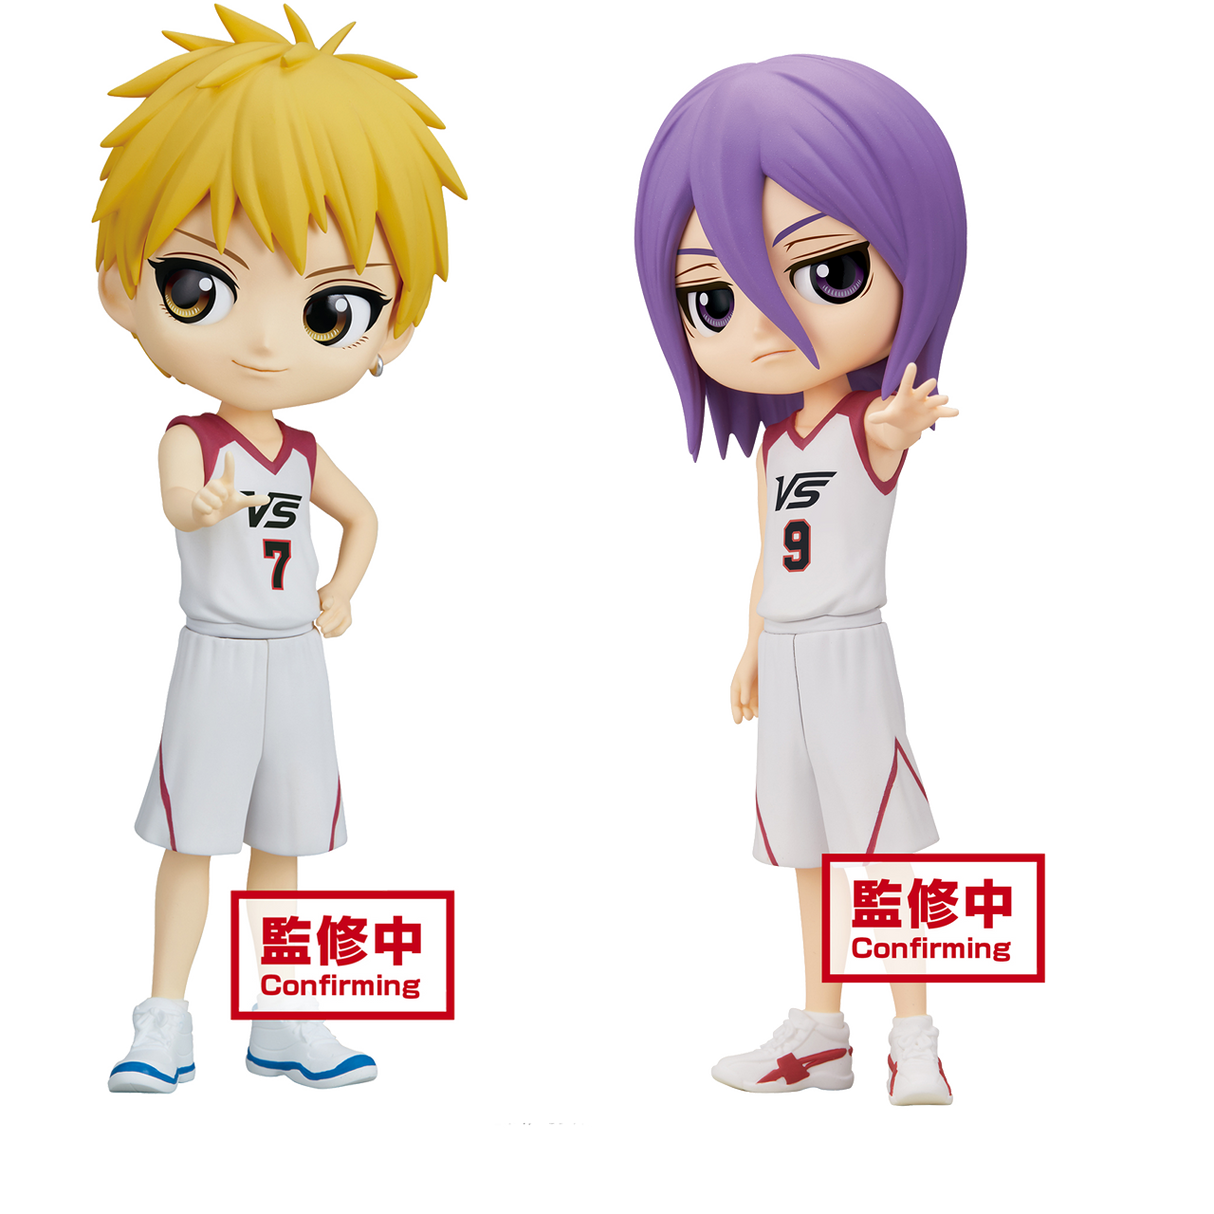 Behold the figurine of Atsushi, the defensive behemoth, and Kise, the adaptable star. If you are looking for more Kuroko's Basketball Merch, We have it all! | Check out all our Anime Merch now!